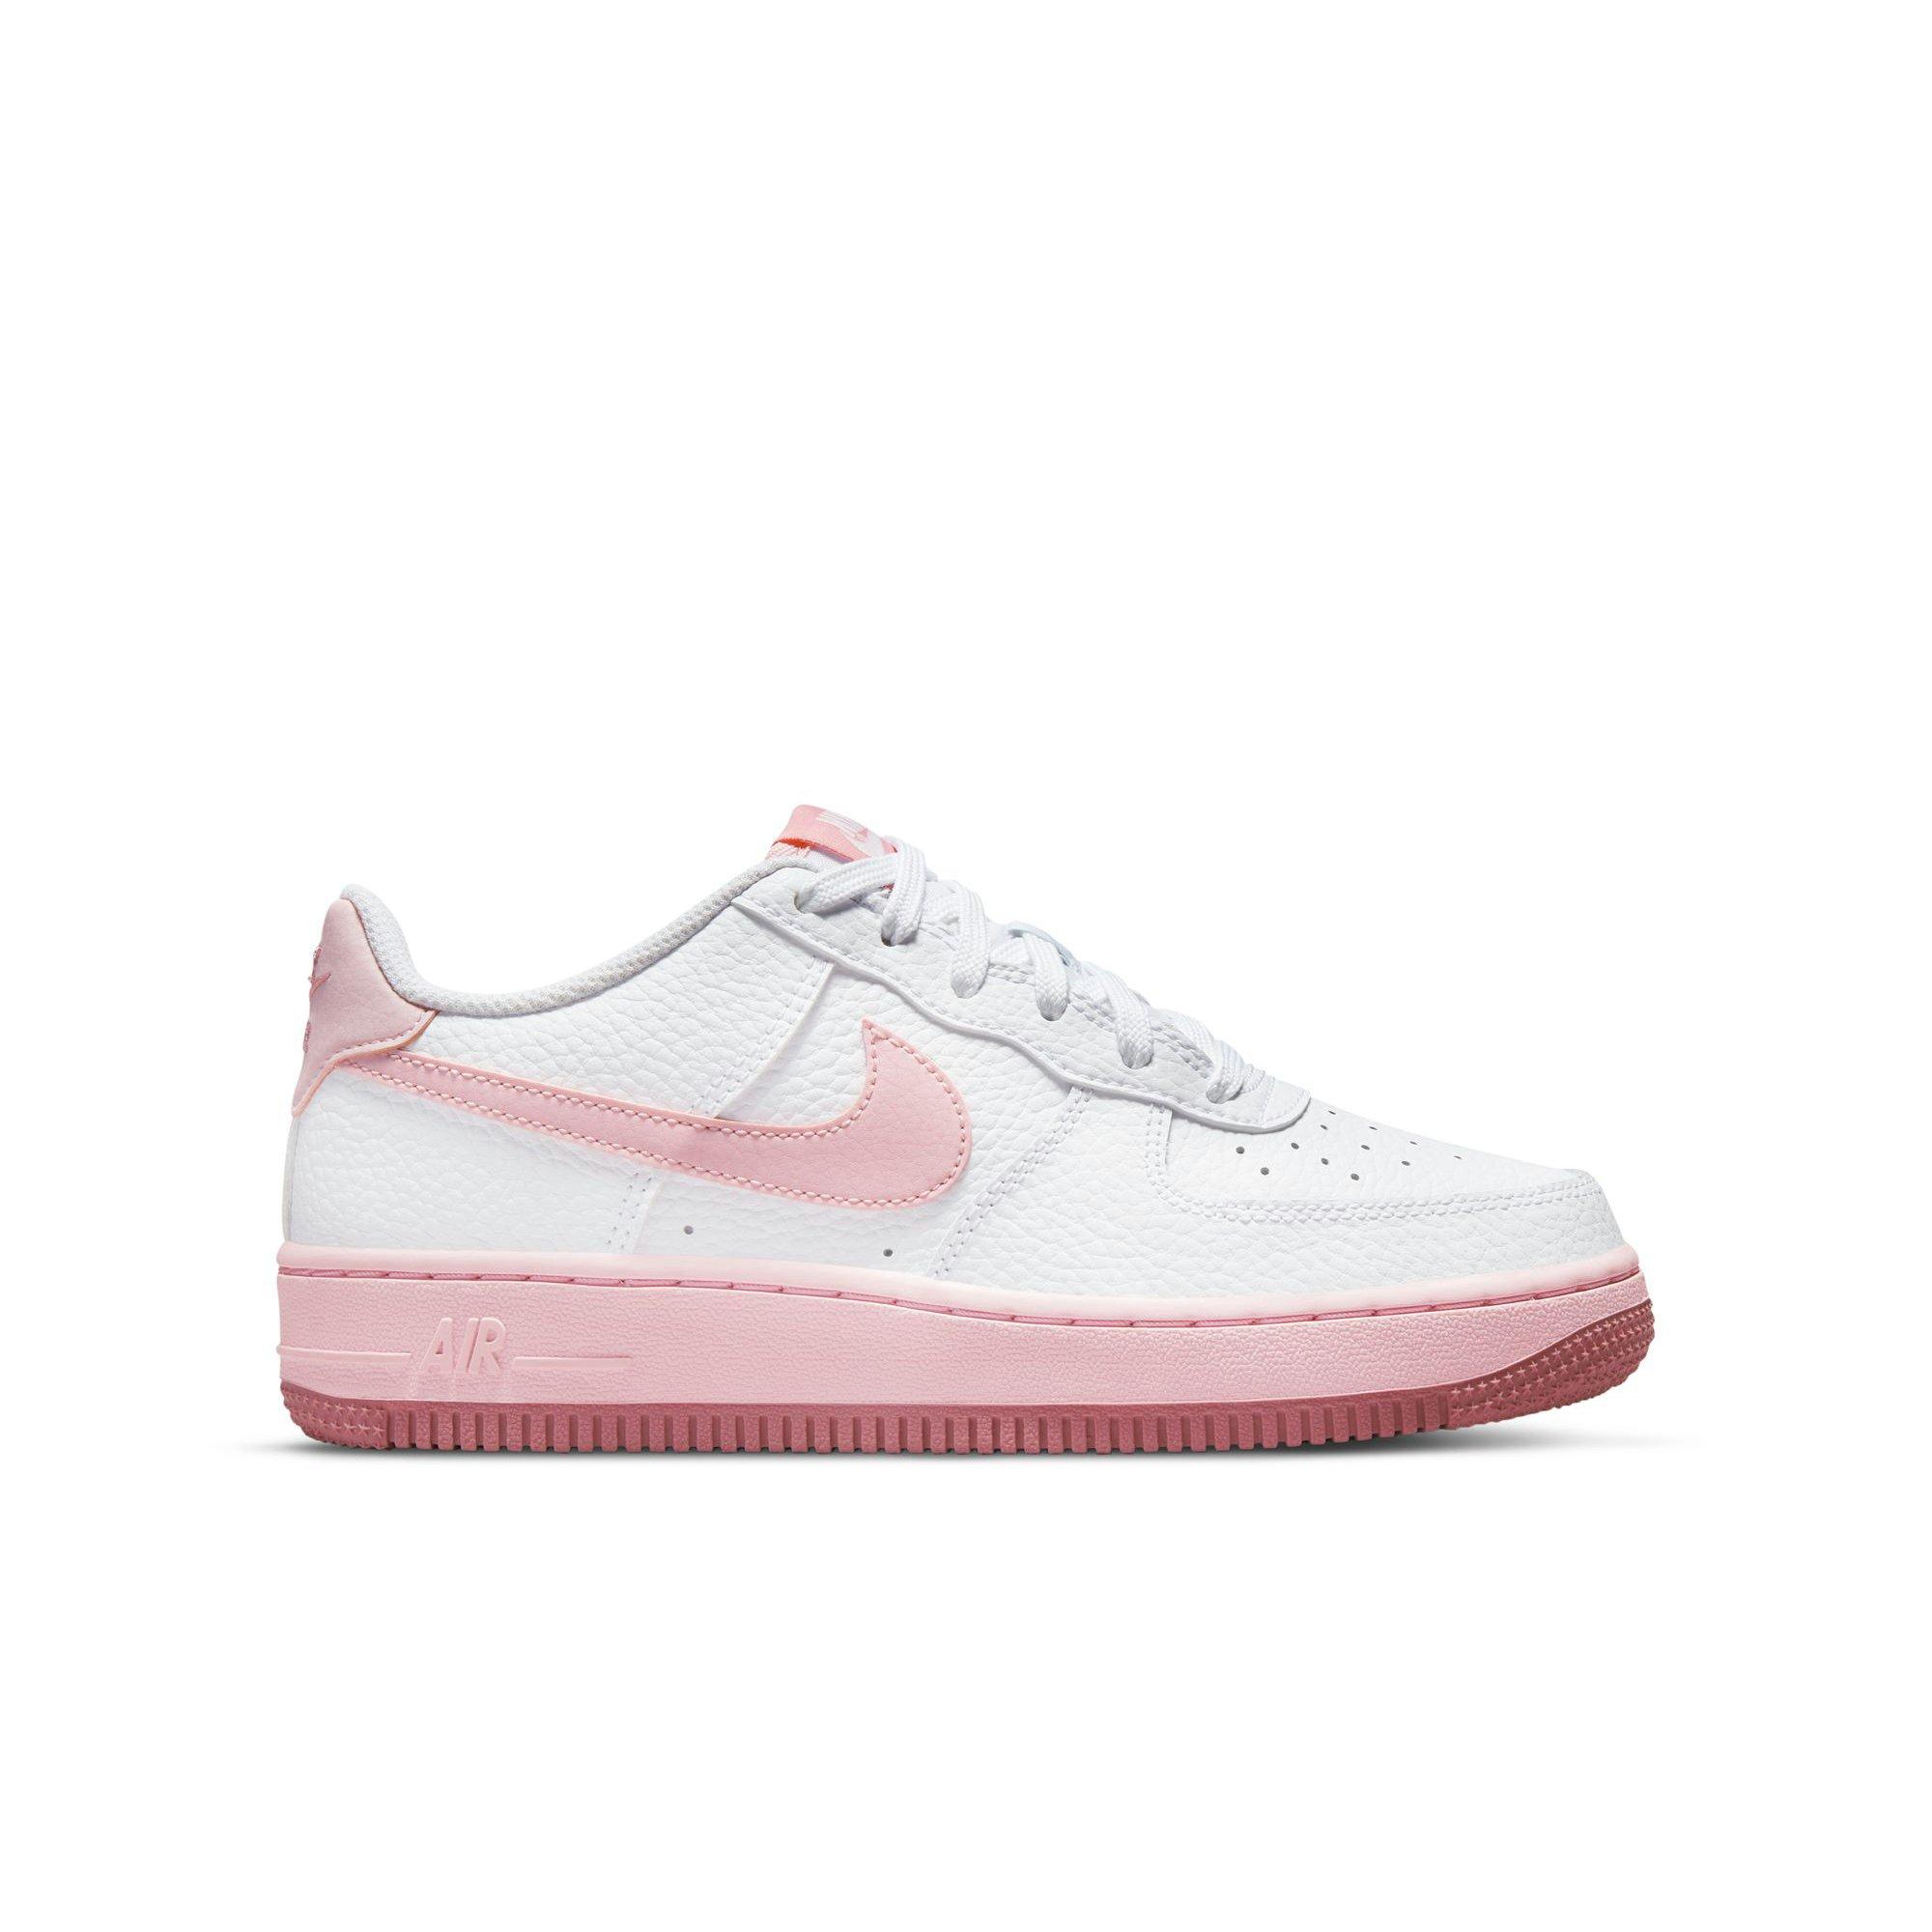 white and pink airforces